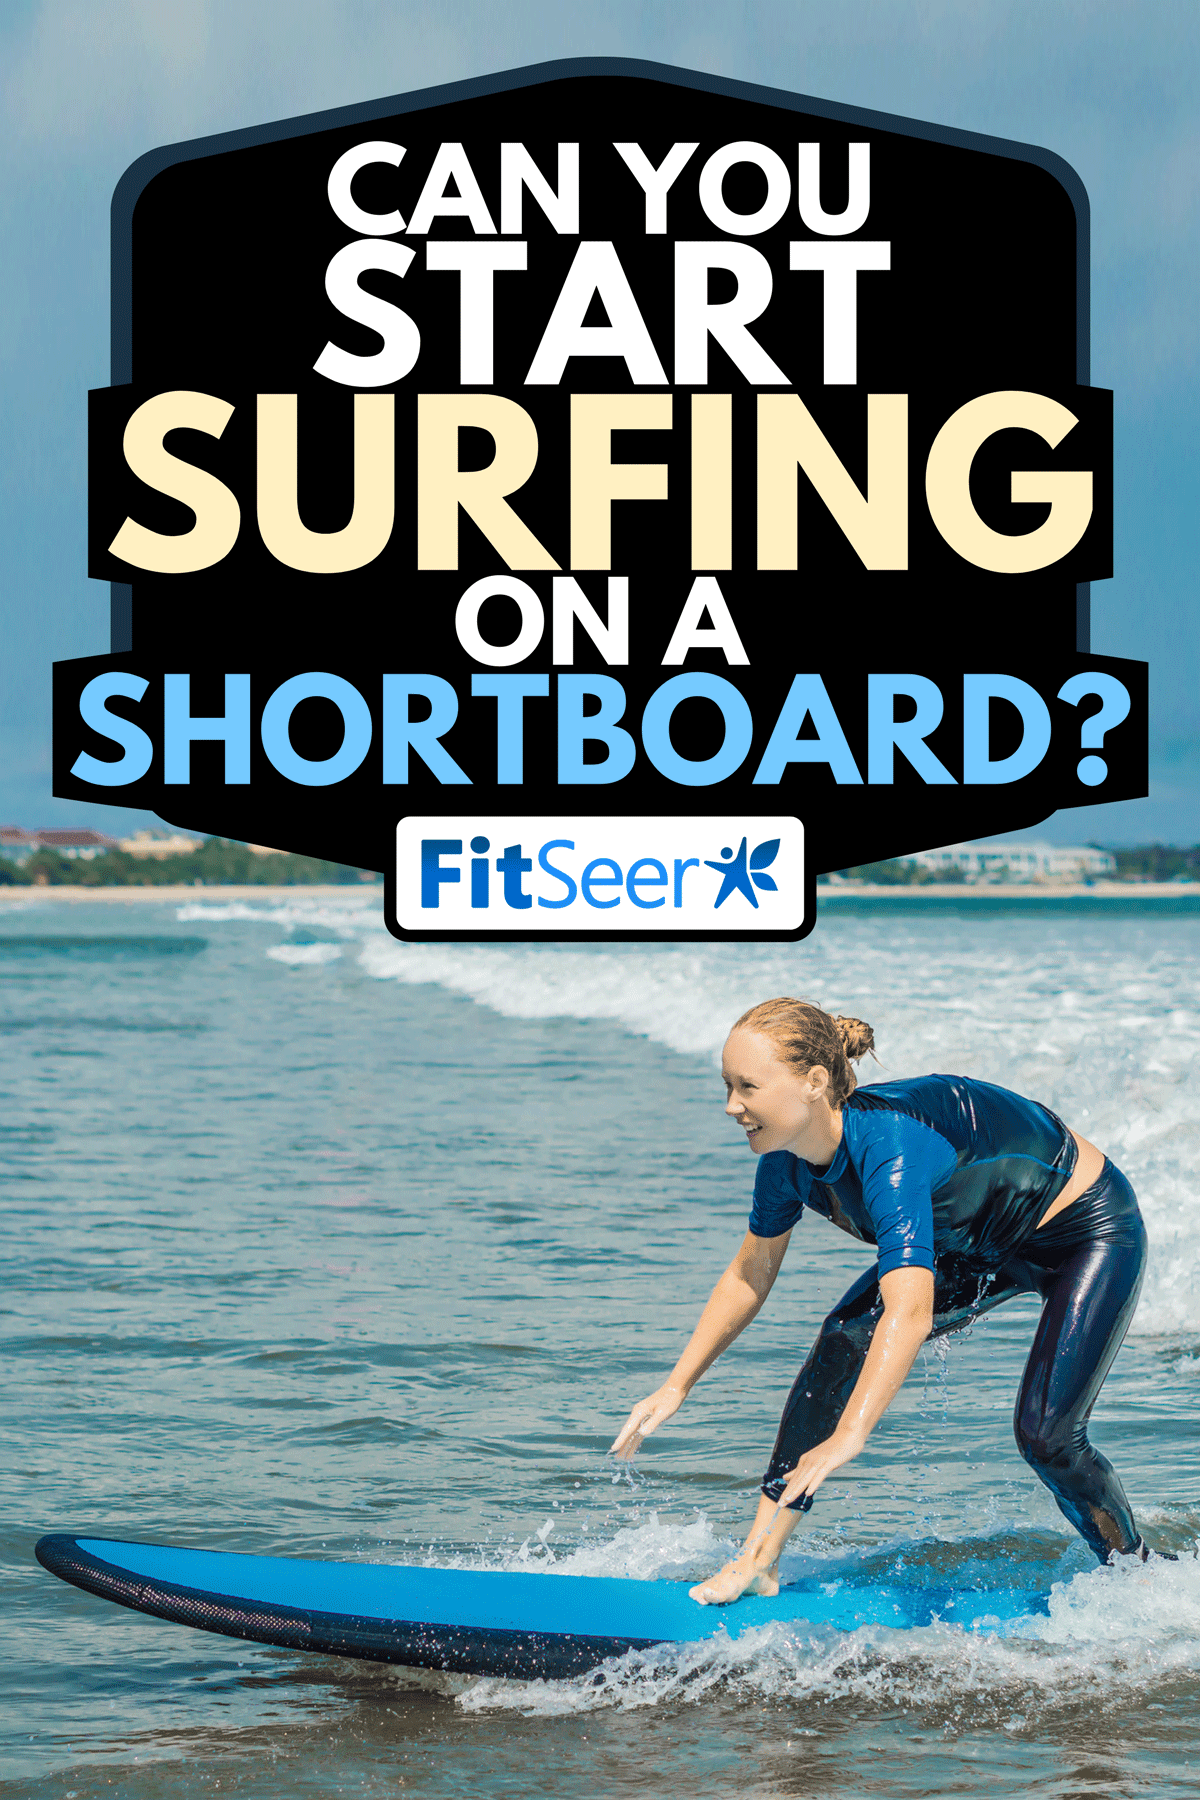 A young woman beginner surfer with blue surfboard having fun on small waves, Can You Start Surfing On A Shortboard?